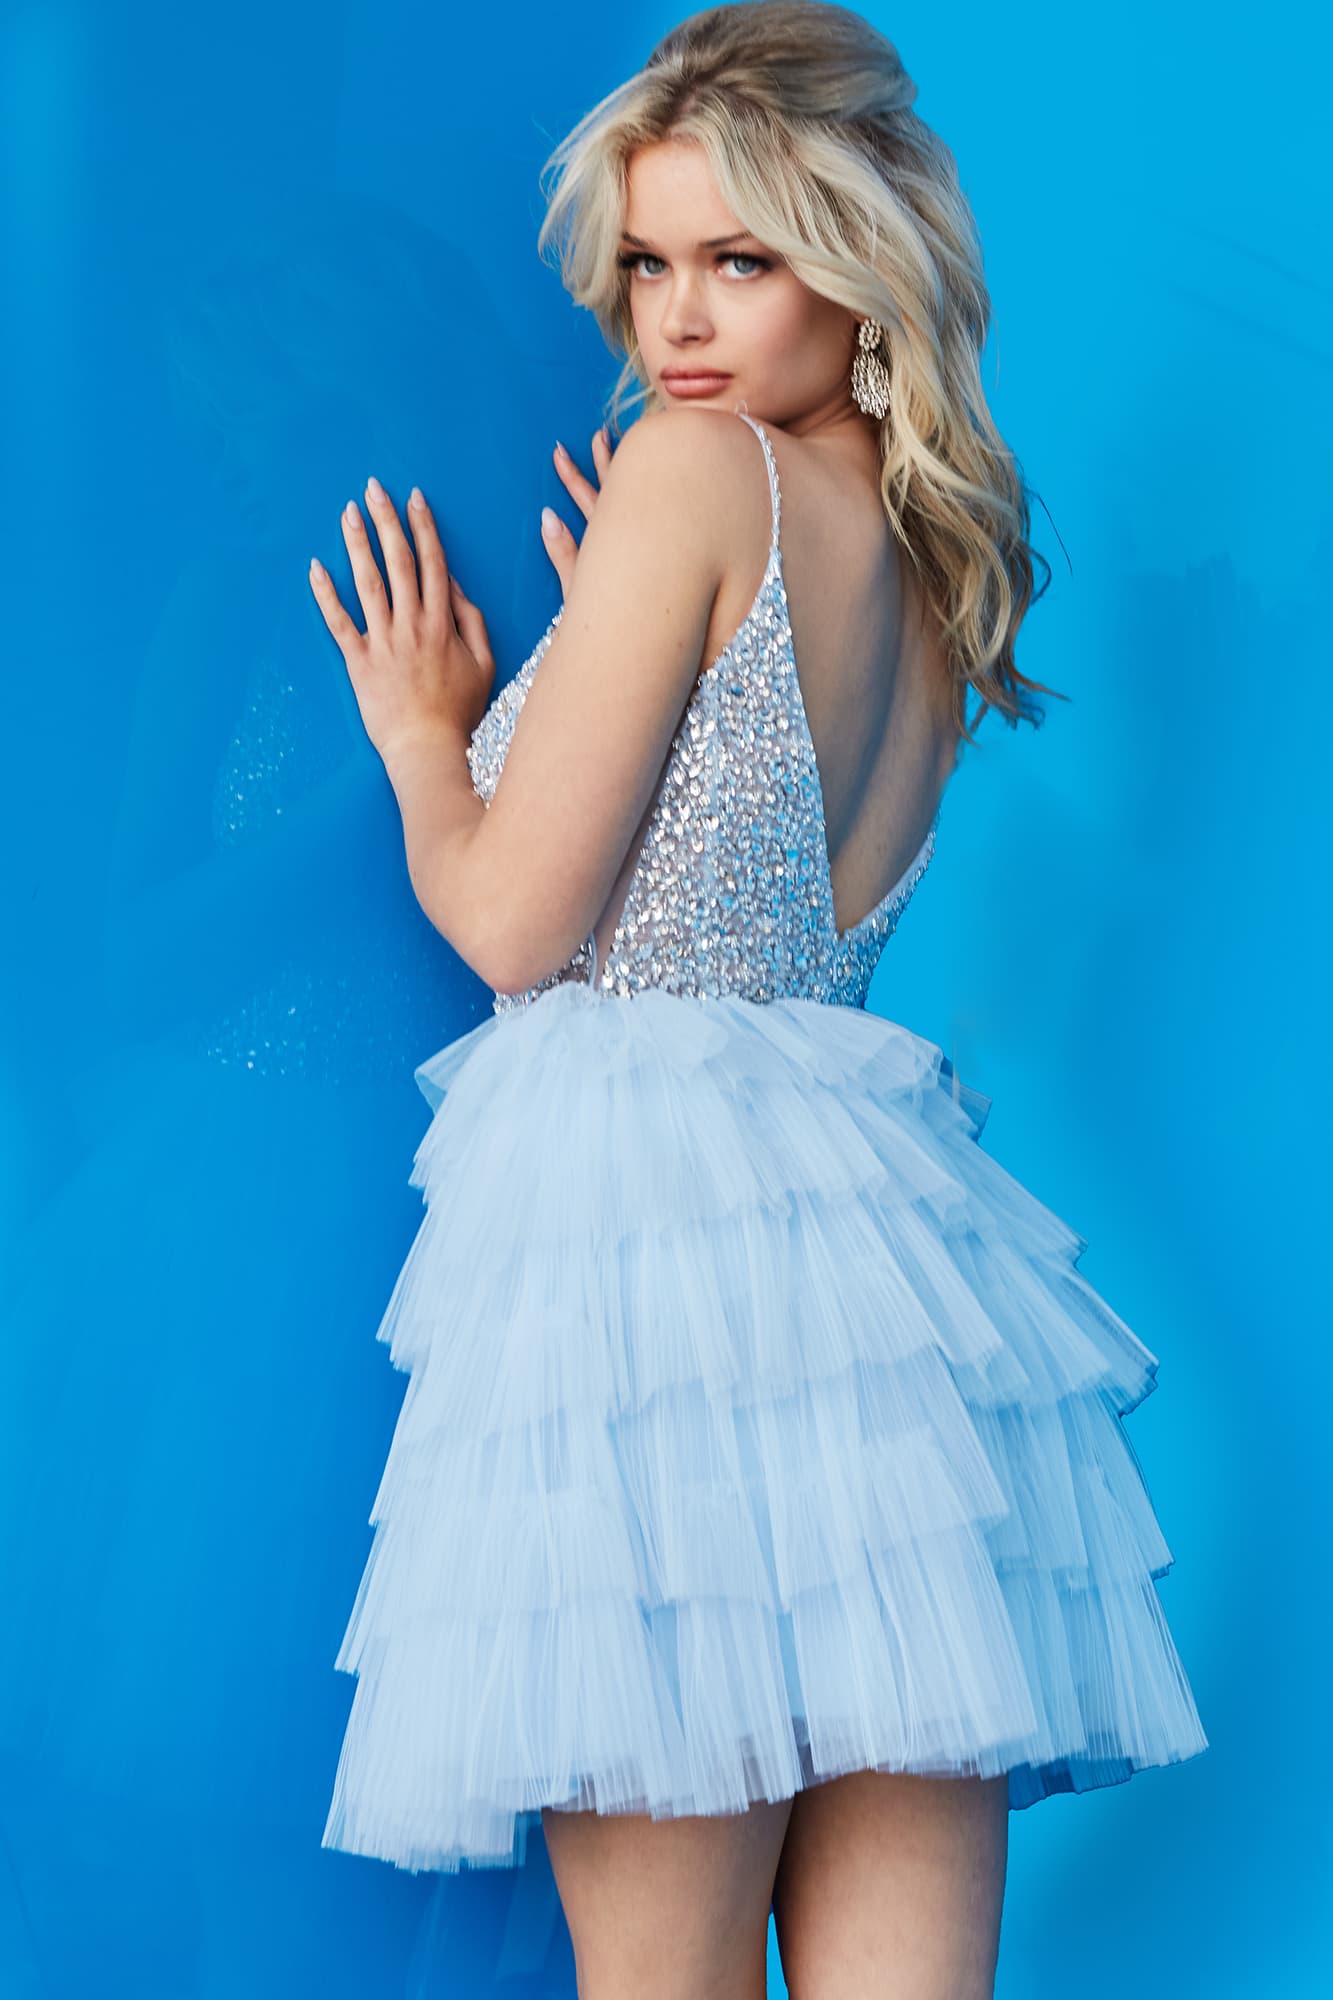 Jovani 22604 Short Layered Tulle Formal Cocktail Dress Pleated Sheer Crystal Bodice Gown Short fit and flare light blue Jovani homecoming dress 22604 features tulle layered skirt and Crystal Rhinestone beaded bodice with sheer sides and plunging neckline  Available Sizes: 00,0,2,4,6,8,10,12,14,16,18,20,22,24  Available Colors: Cafe, Light Blue